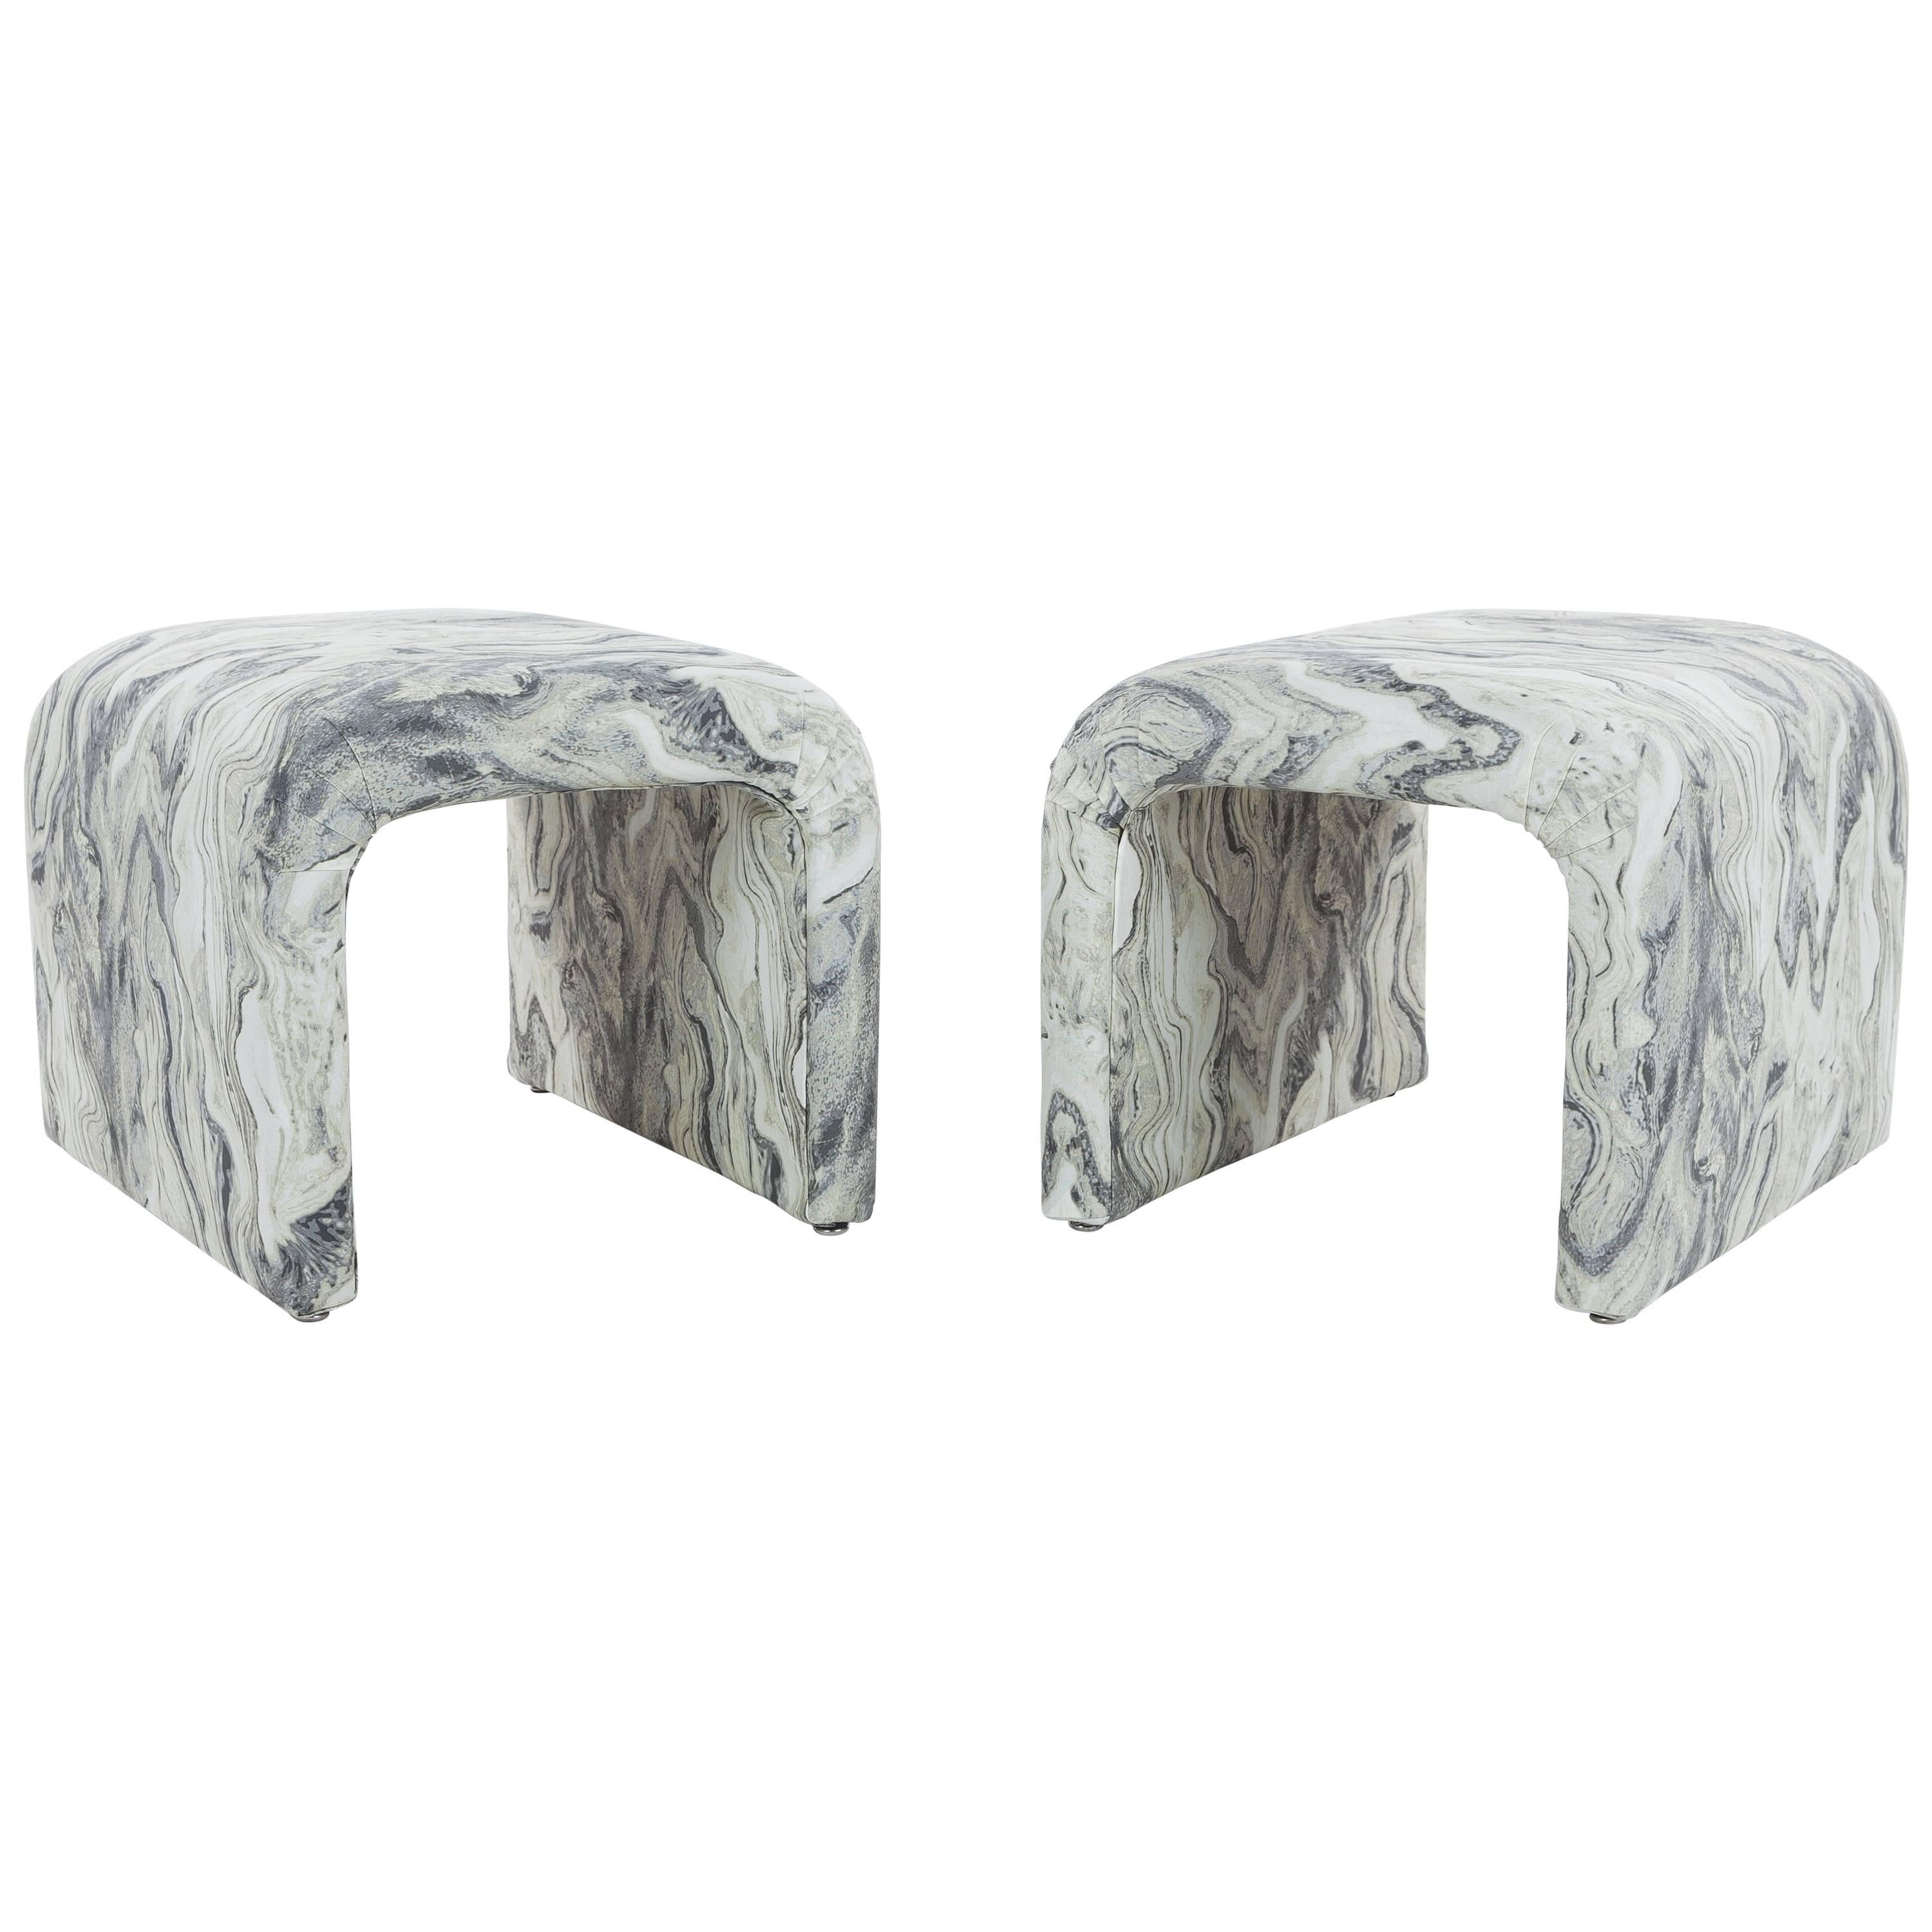 Pair of Vintage Waterfall Ottomans in New Marbleized Fabric For Sale